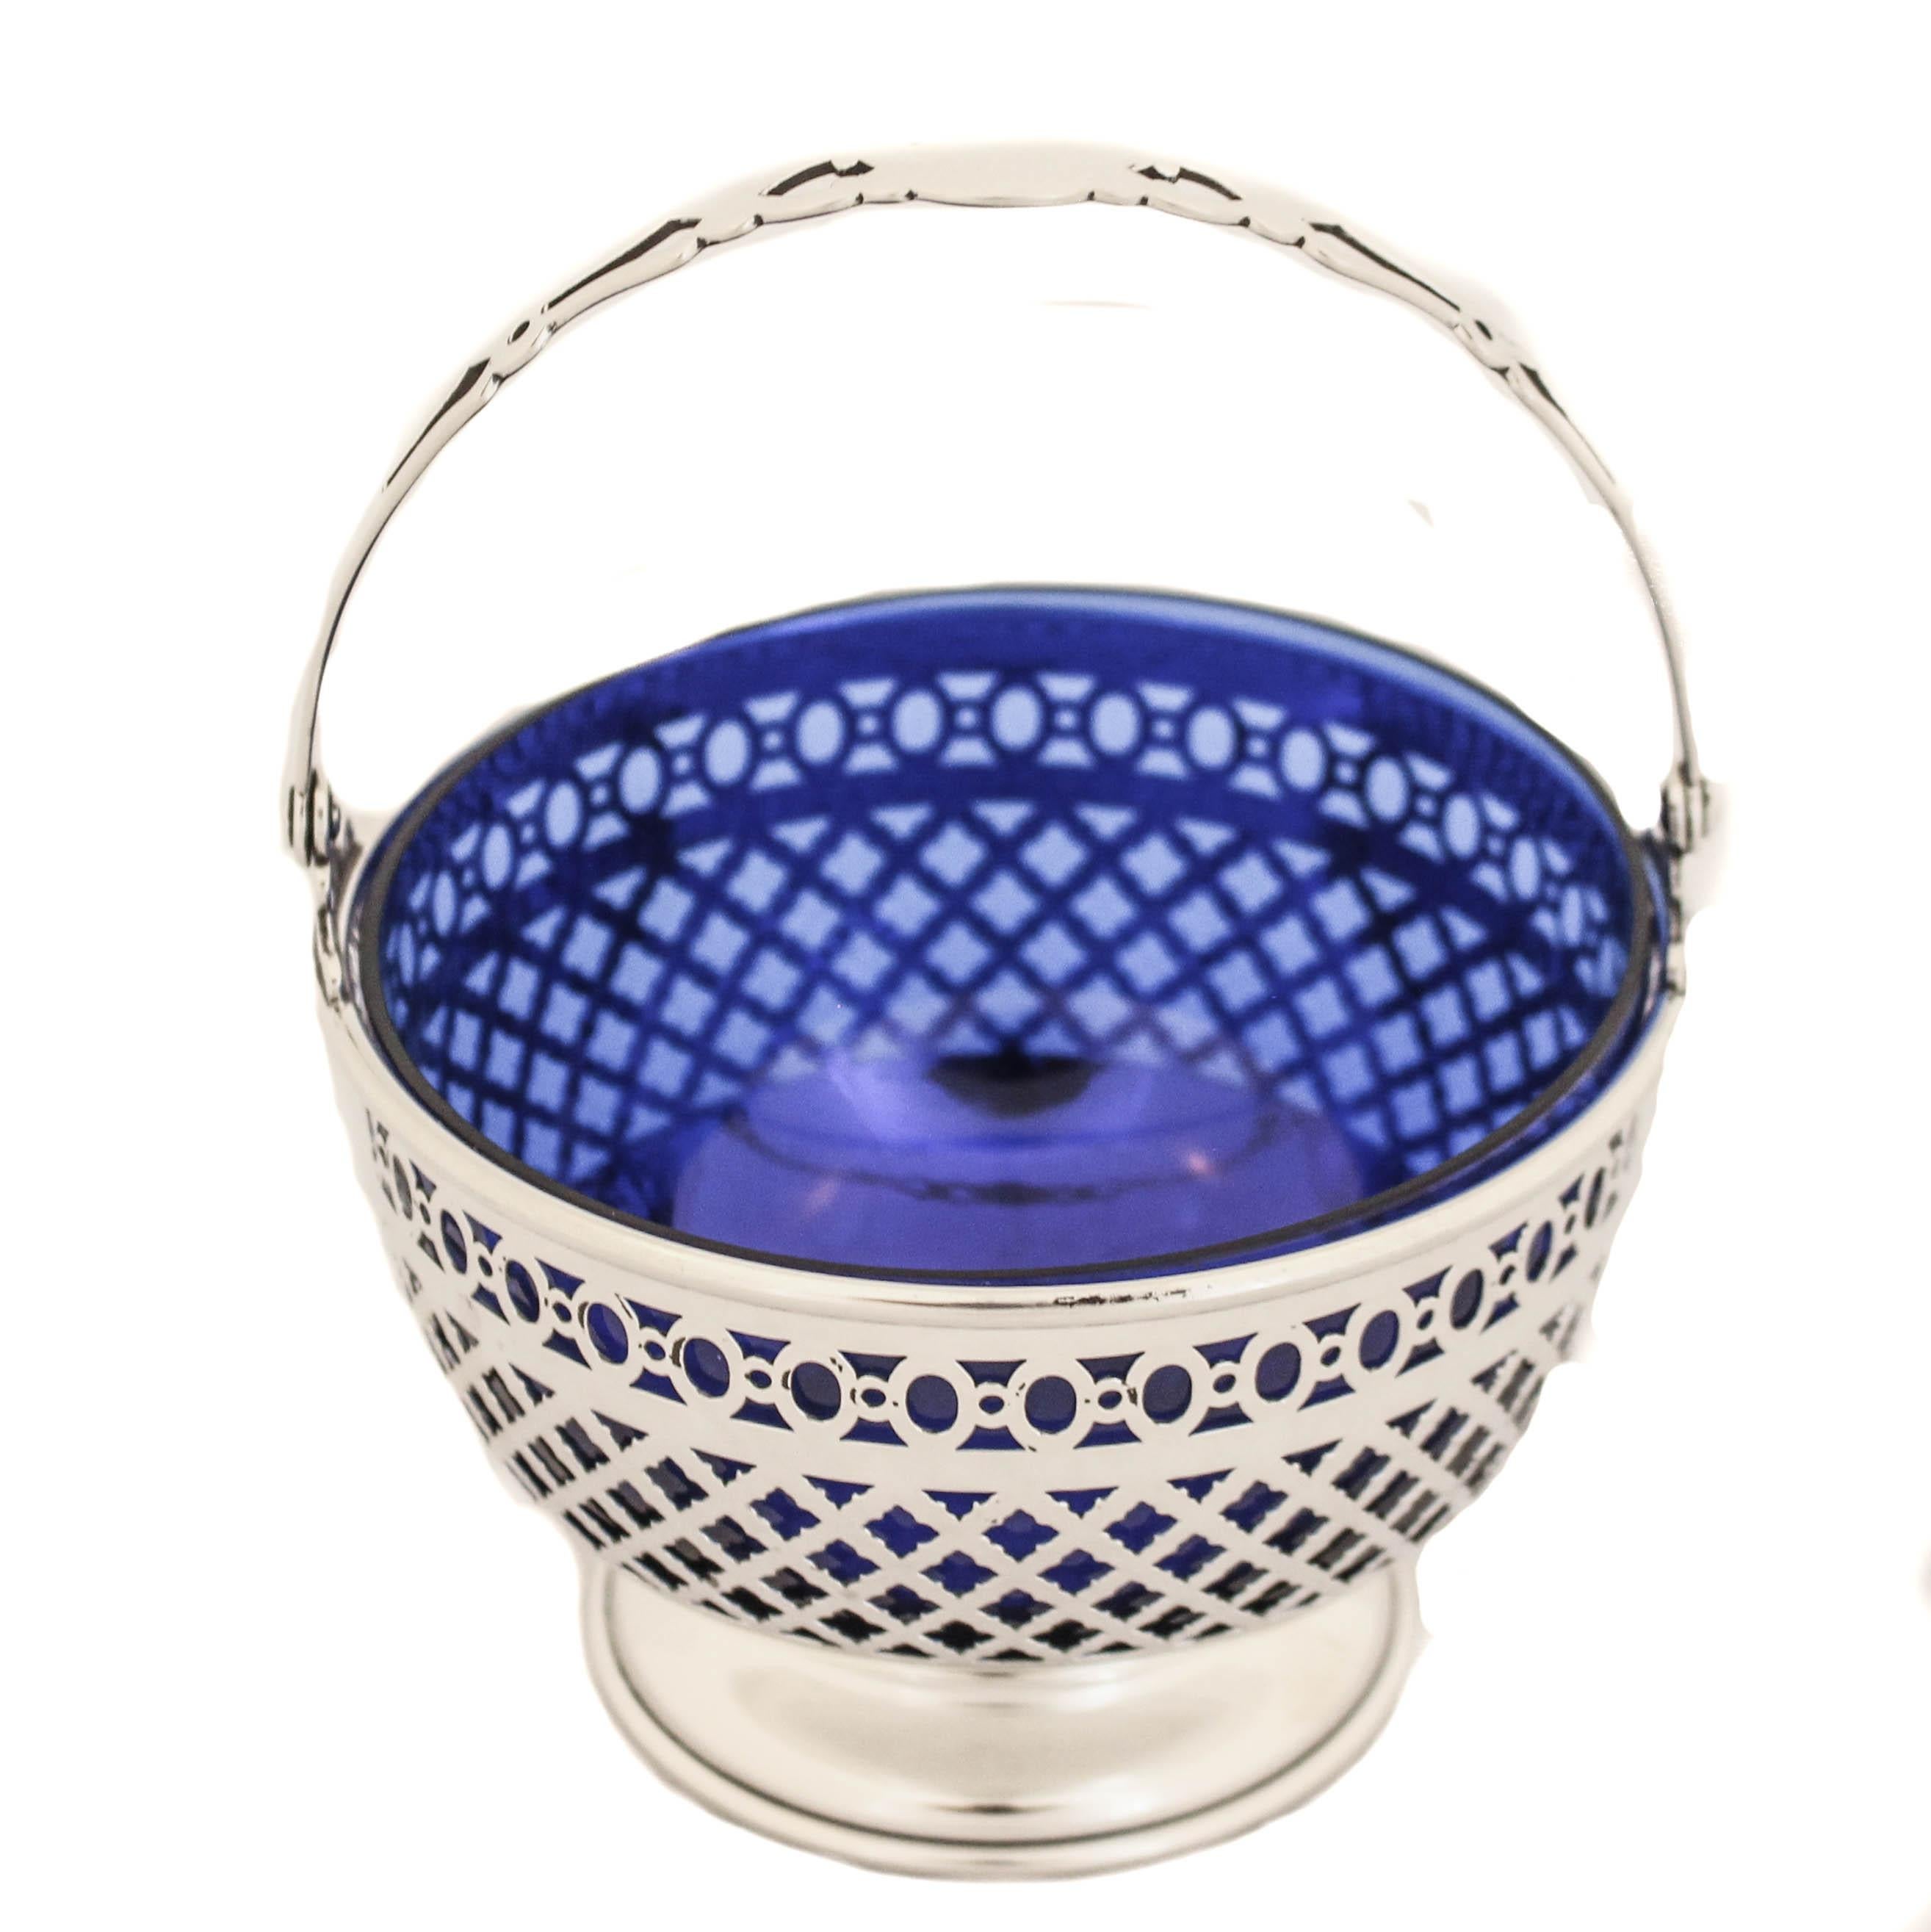 Being offered is a sterling silver basket with a cobalt liner manufactured by Gorham Silversmiths and retailed by Shreve, Crump & Low.  The sterling silver is reticulated so the cobalt glass shows through and gives a dramatic appearance.  The cutout